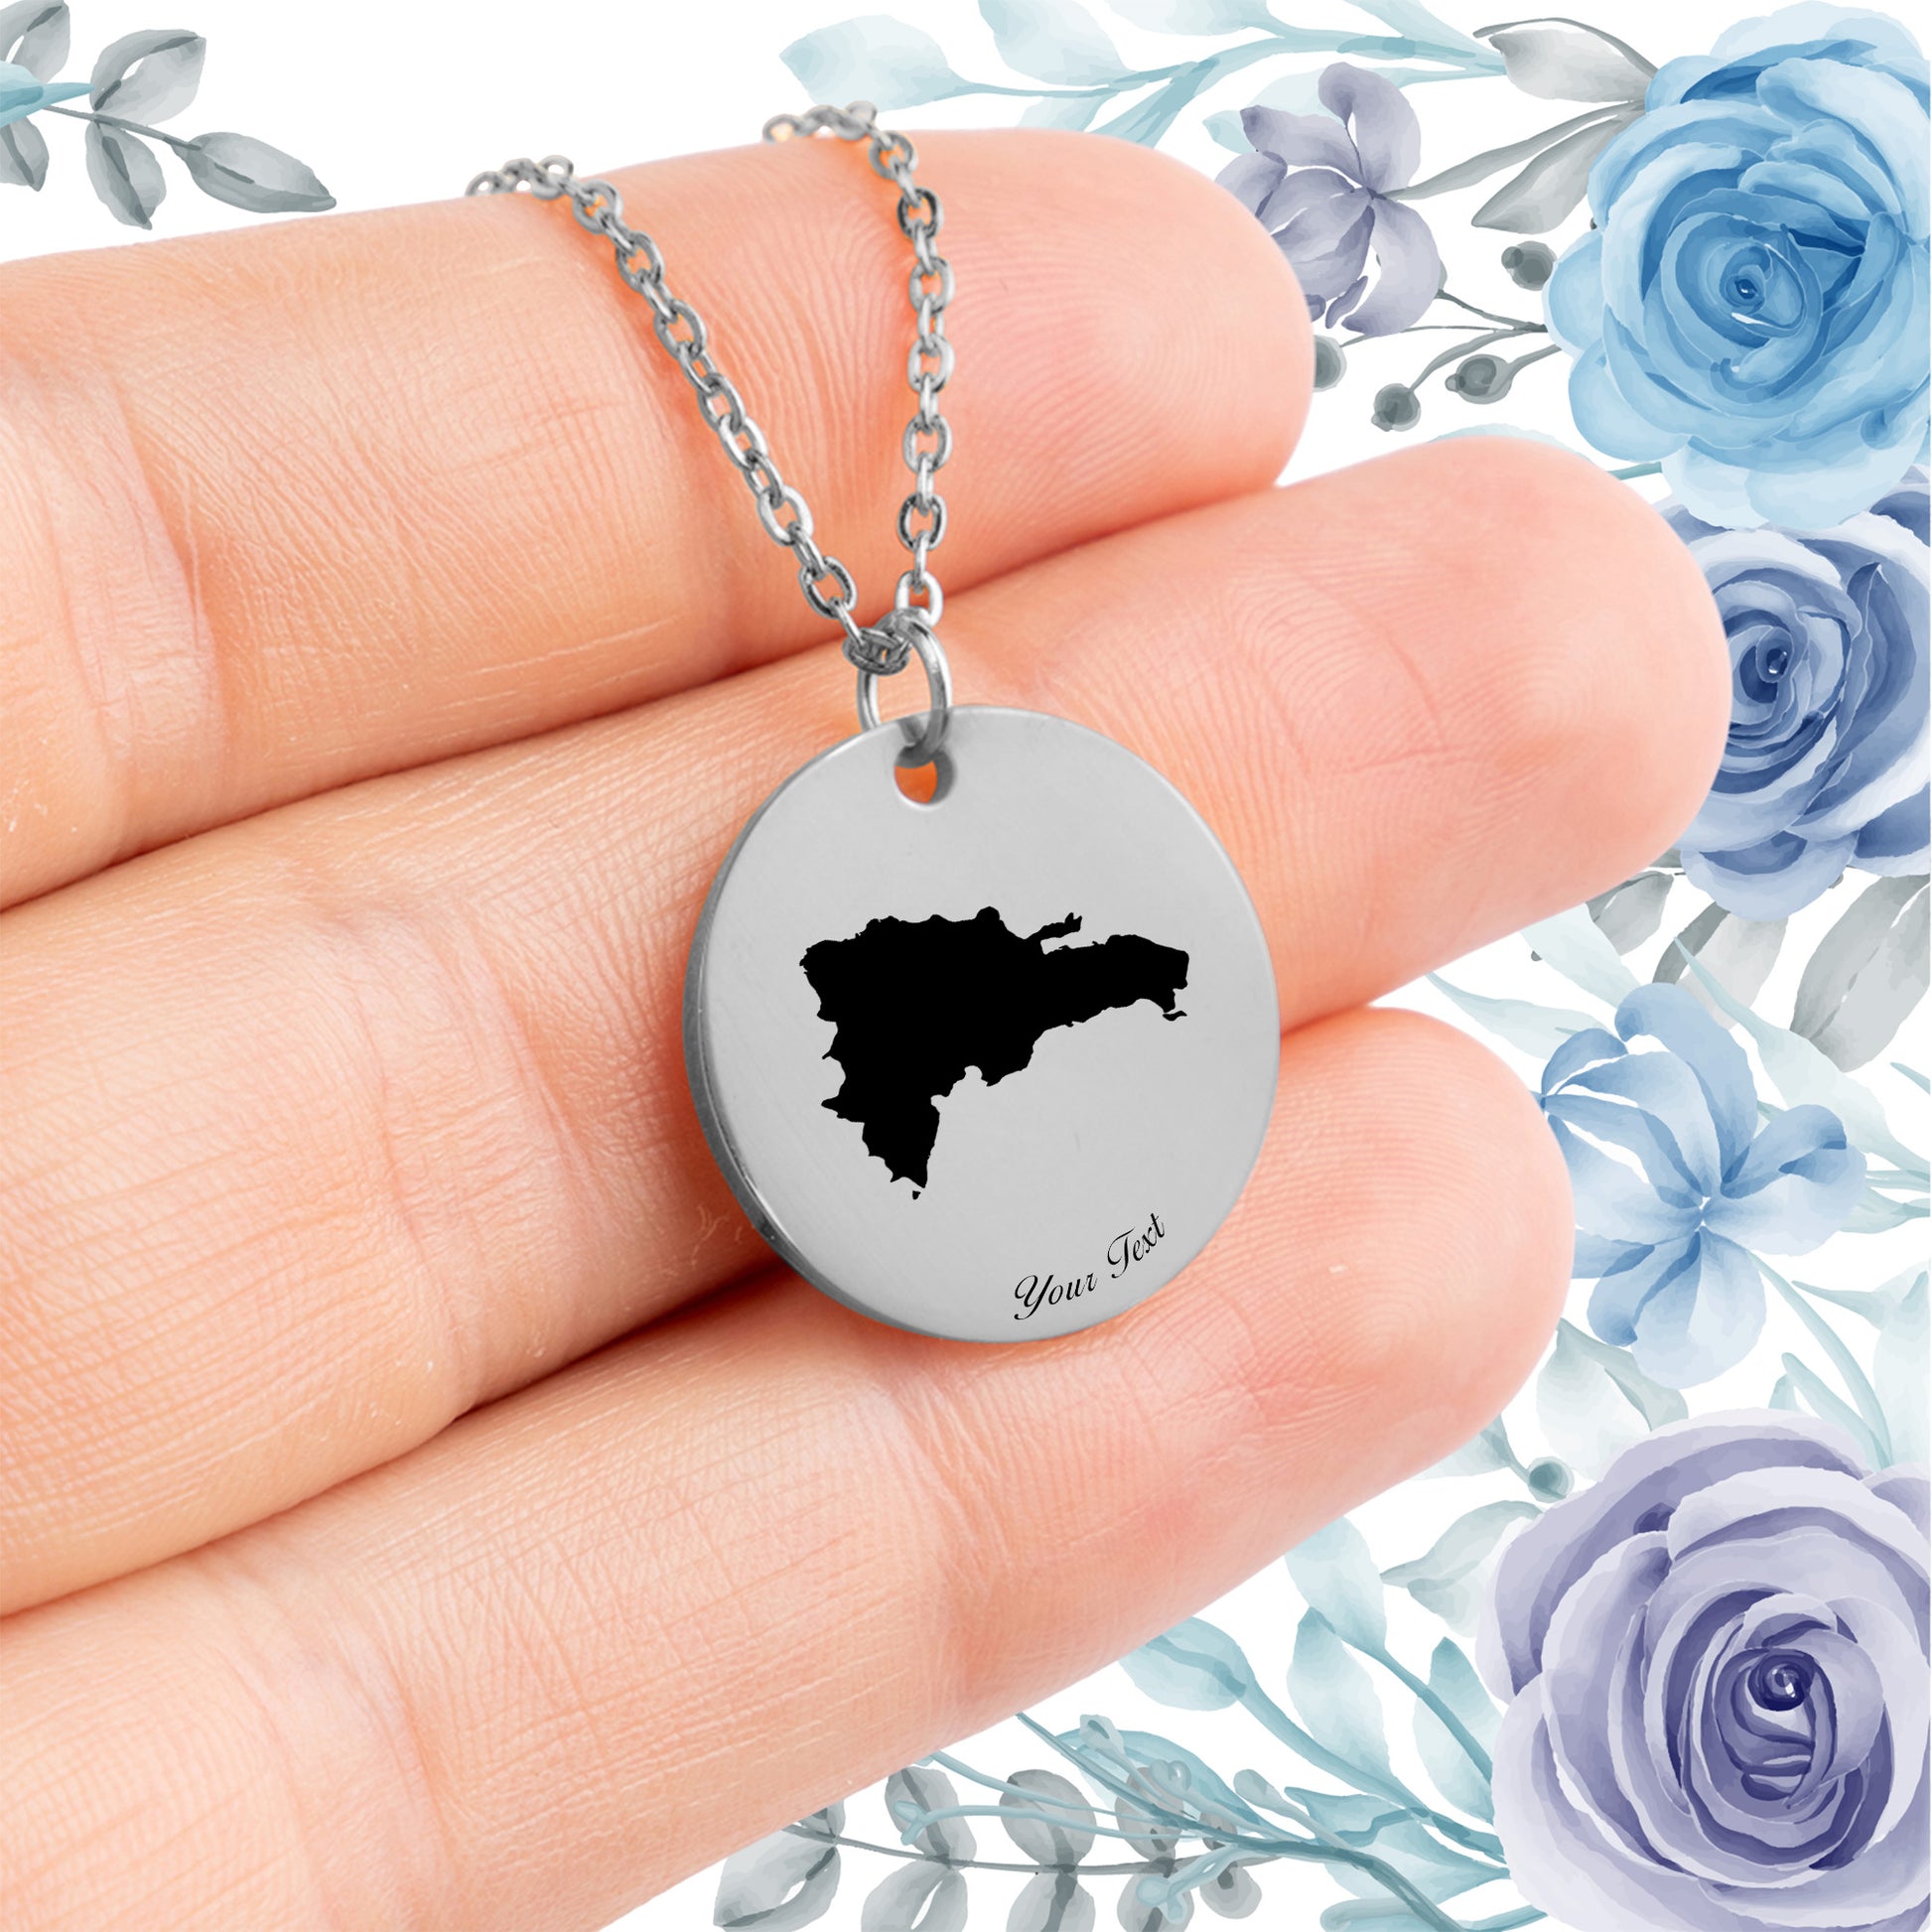 Dominica Republic Country Map Necklace - Personalizable Jewelry